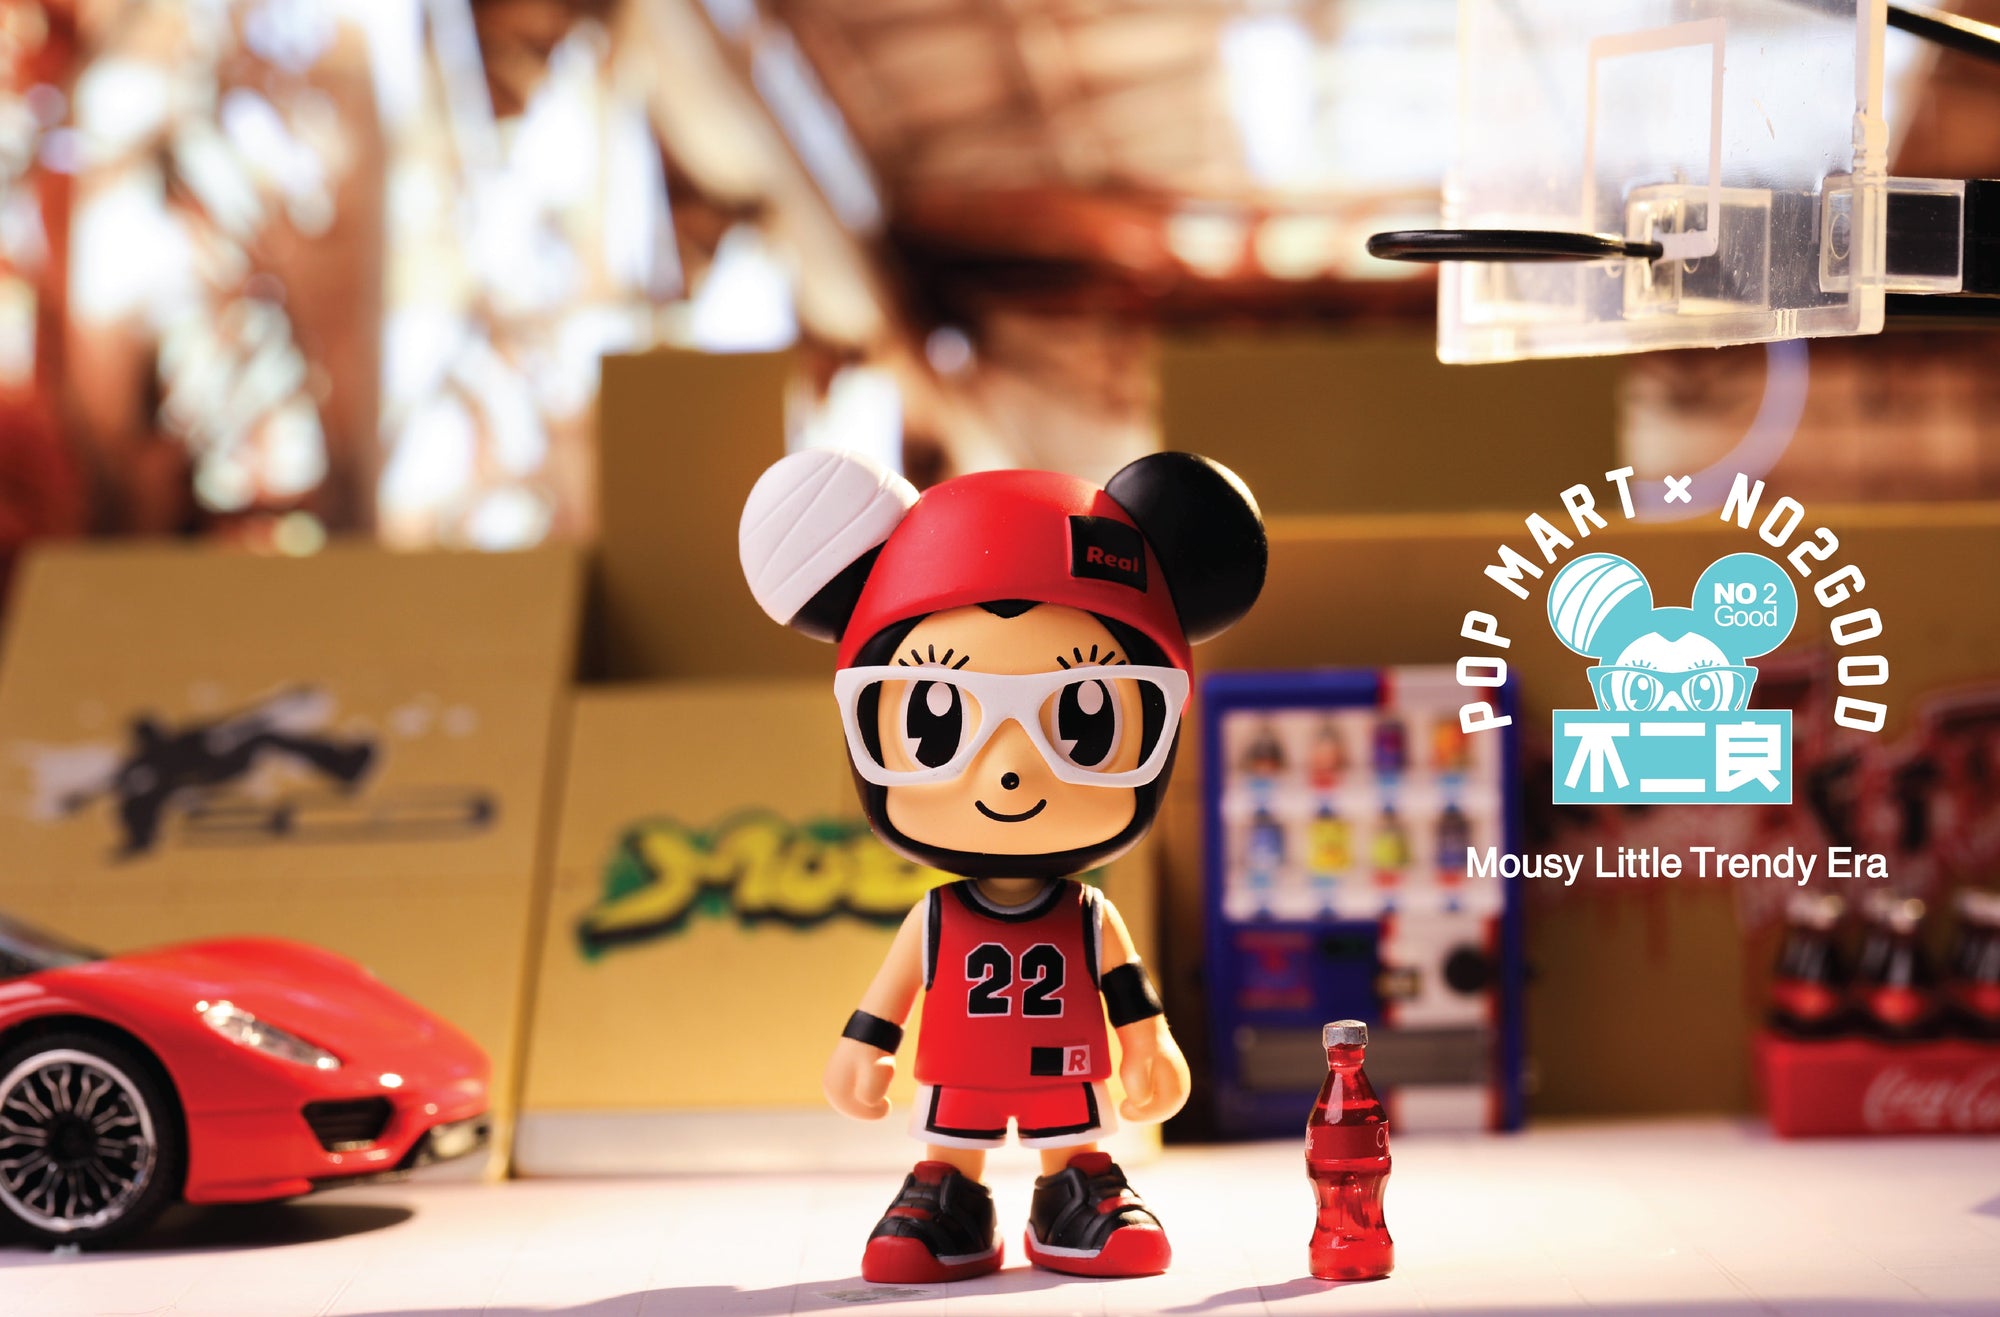 Mousy Little x Stay Real Trendy Era Blind Box Toy Series by No2Good x POP MART